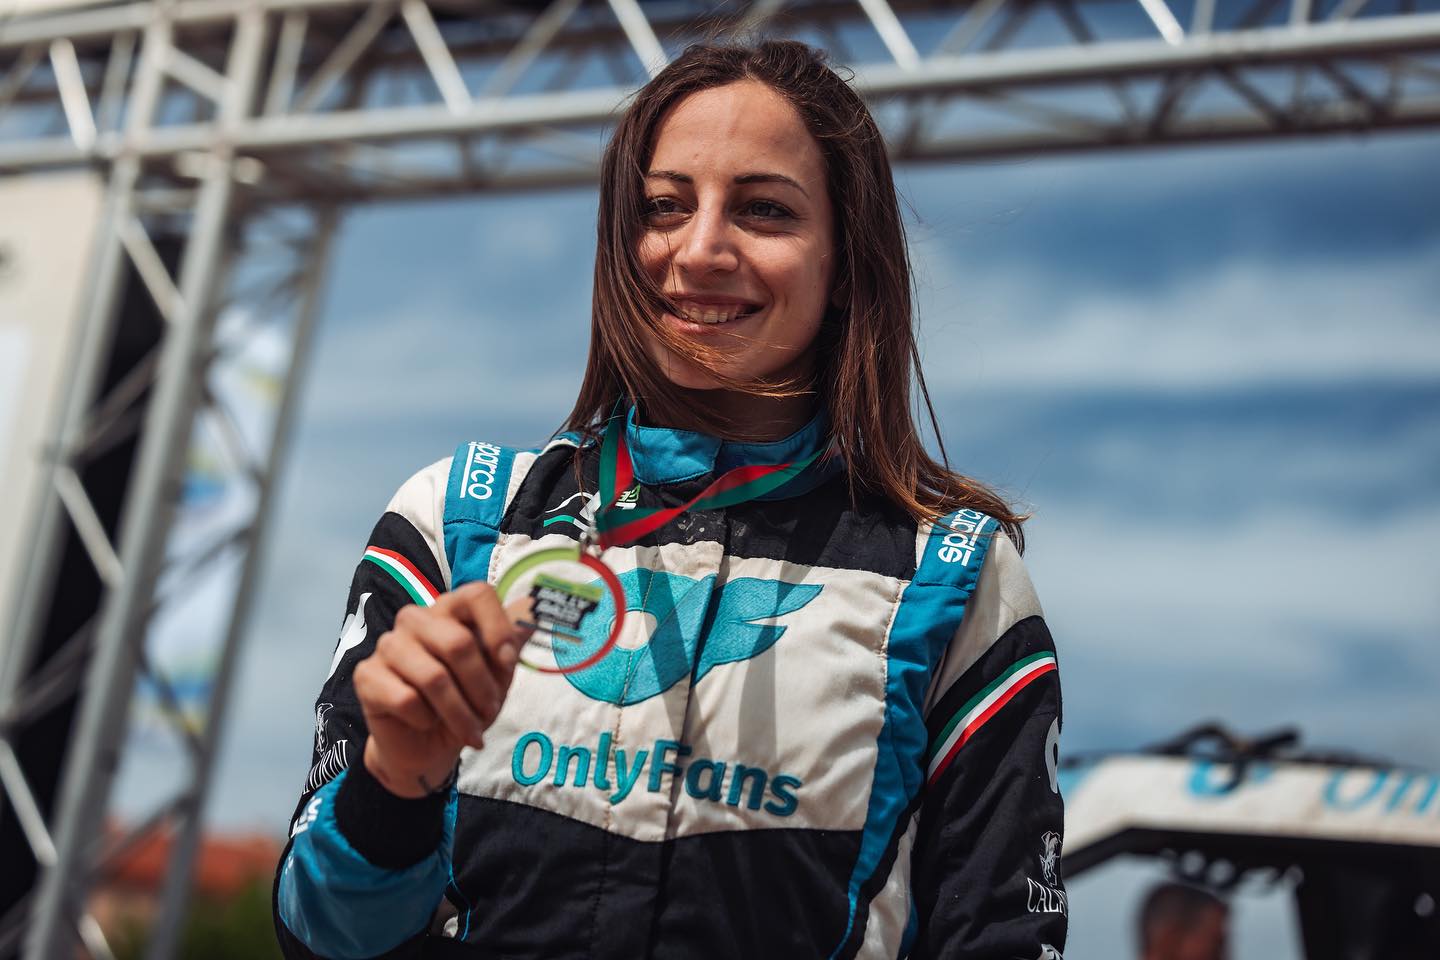 Third round of the world championship in the pocket with a second place 🥈 in W2RC and 5th in the SSV class 🇵🇹

Big thanks to the team, mechanics and my lovely mochileros for all the support and amazing job! ❤️ 

@rallyraidpt has been difficult, wet and muddy but definitely a good round with the most amazing fans 🙌🏼

#rally #rallylife #worldchampionship #canam